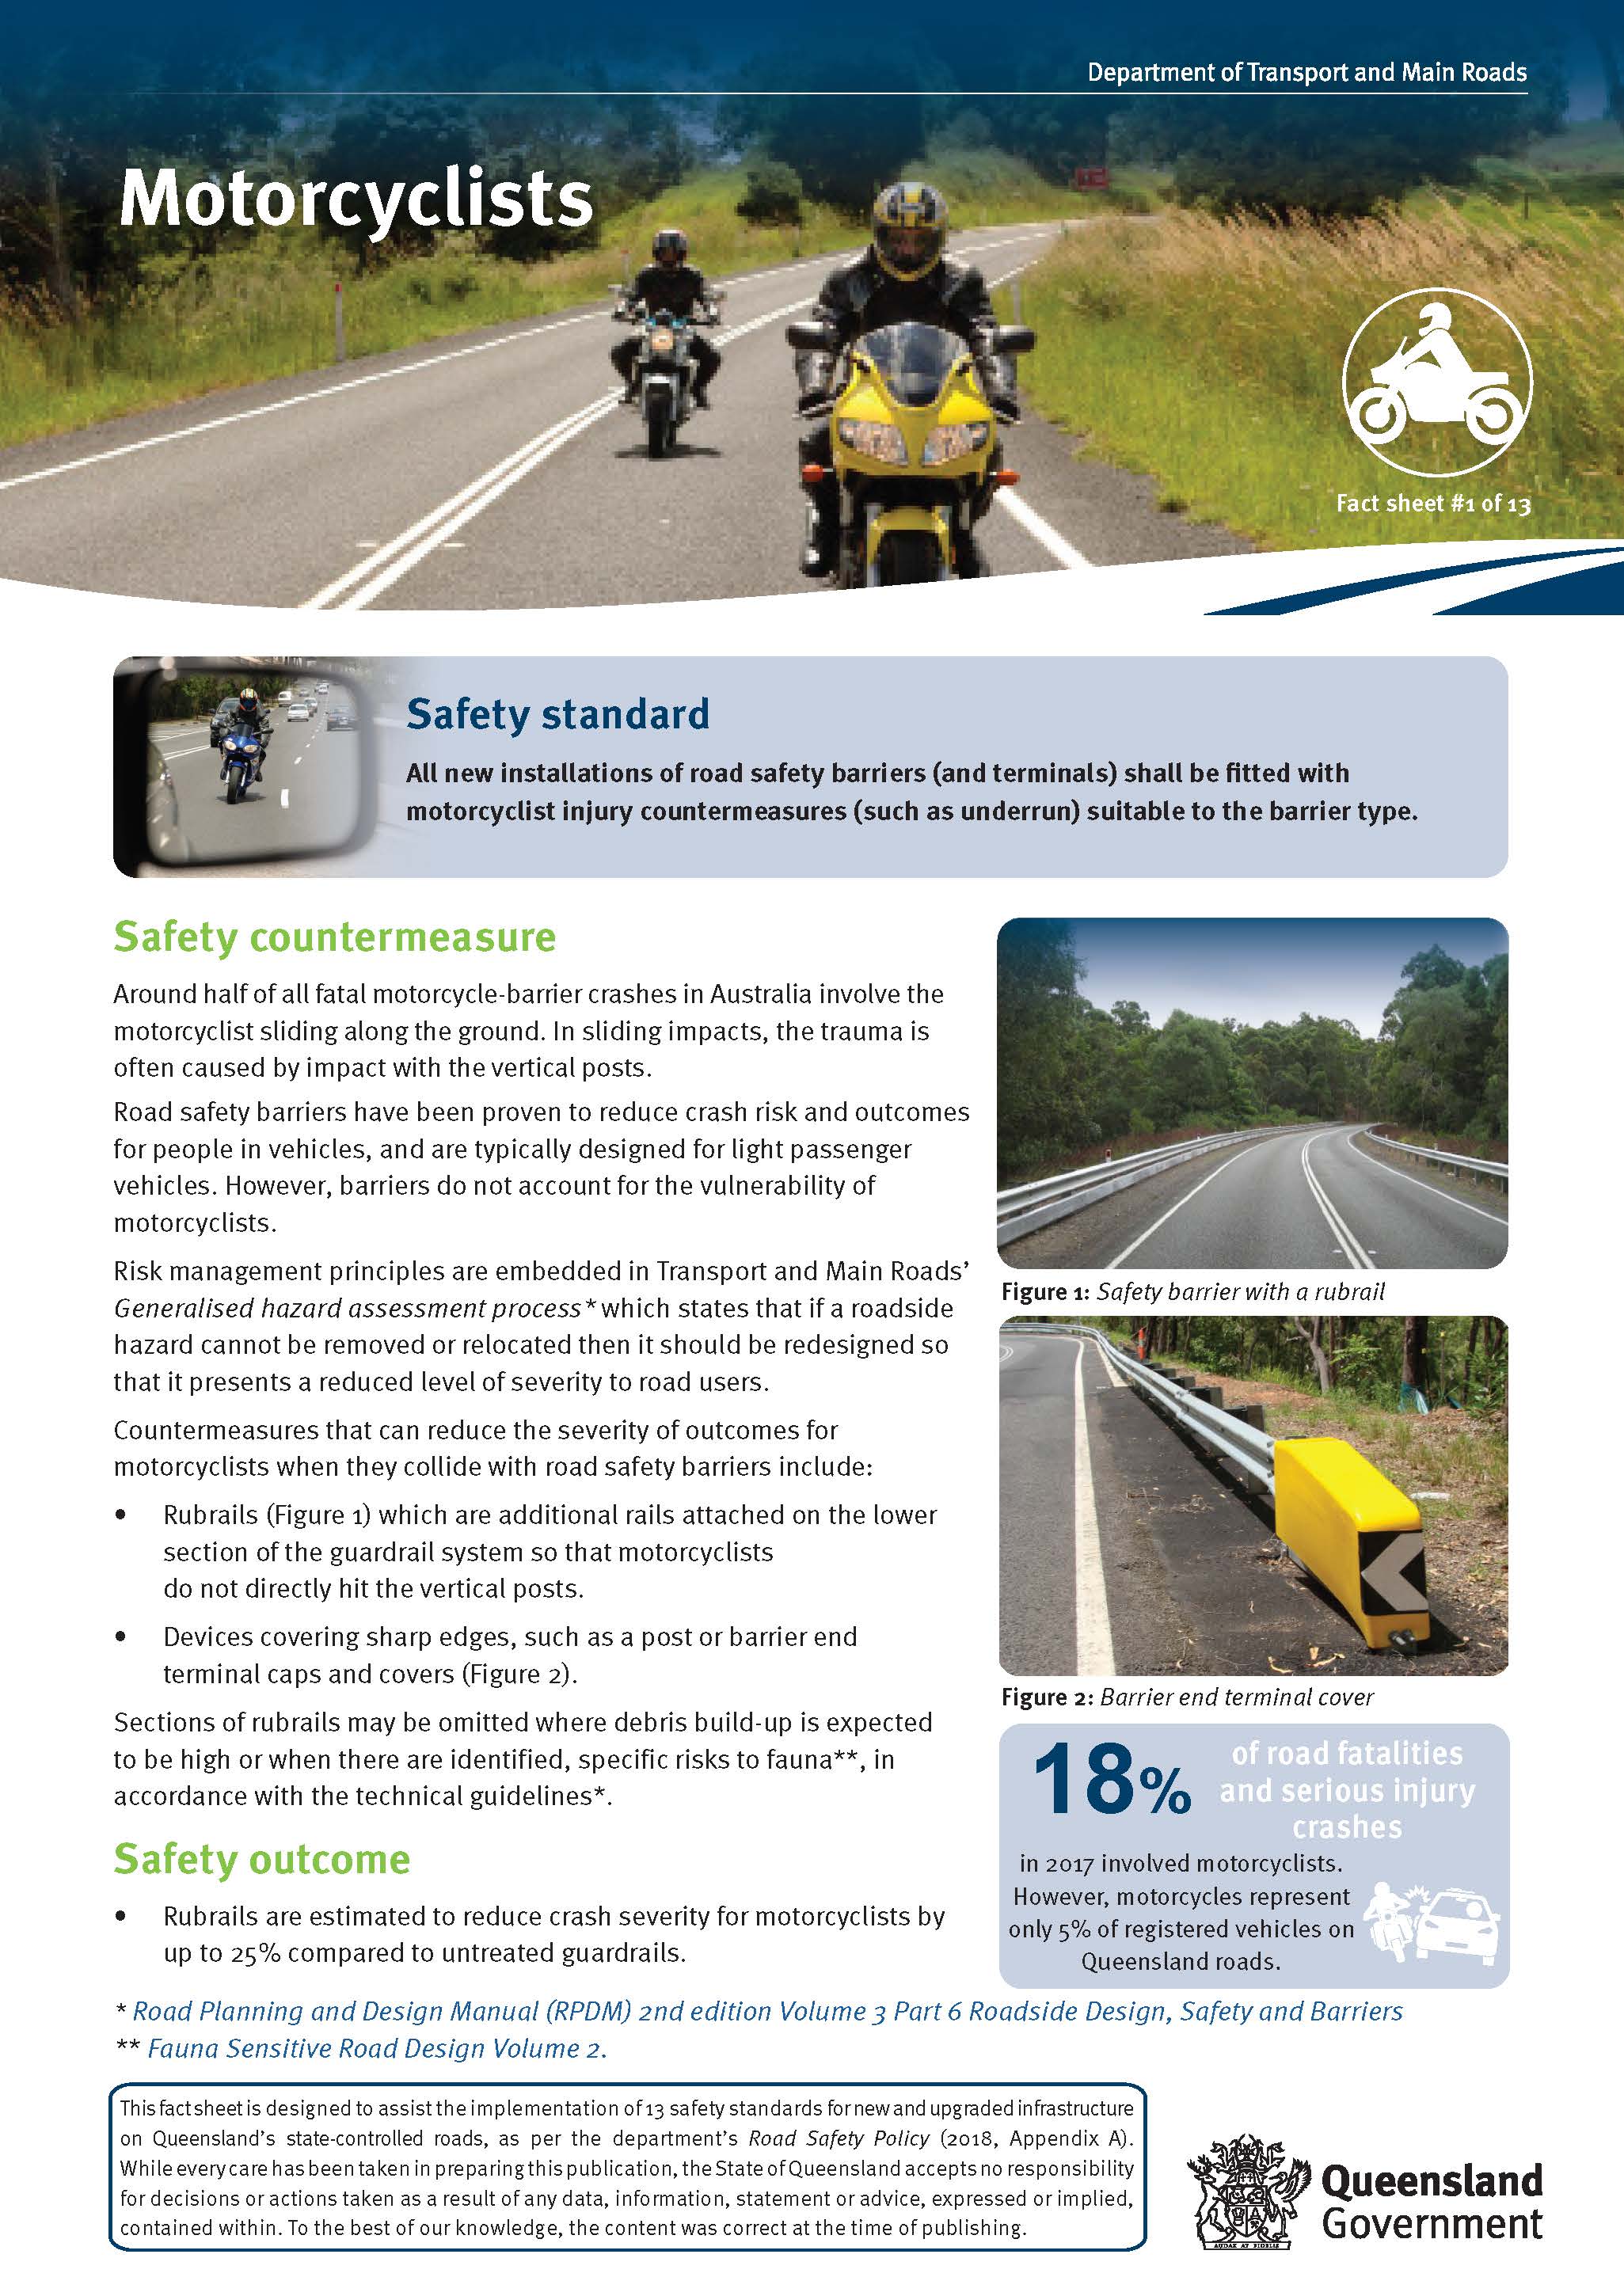 RSP Fact Sheet_01_Motorcyclists